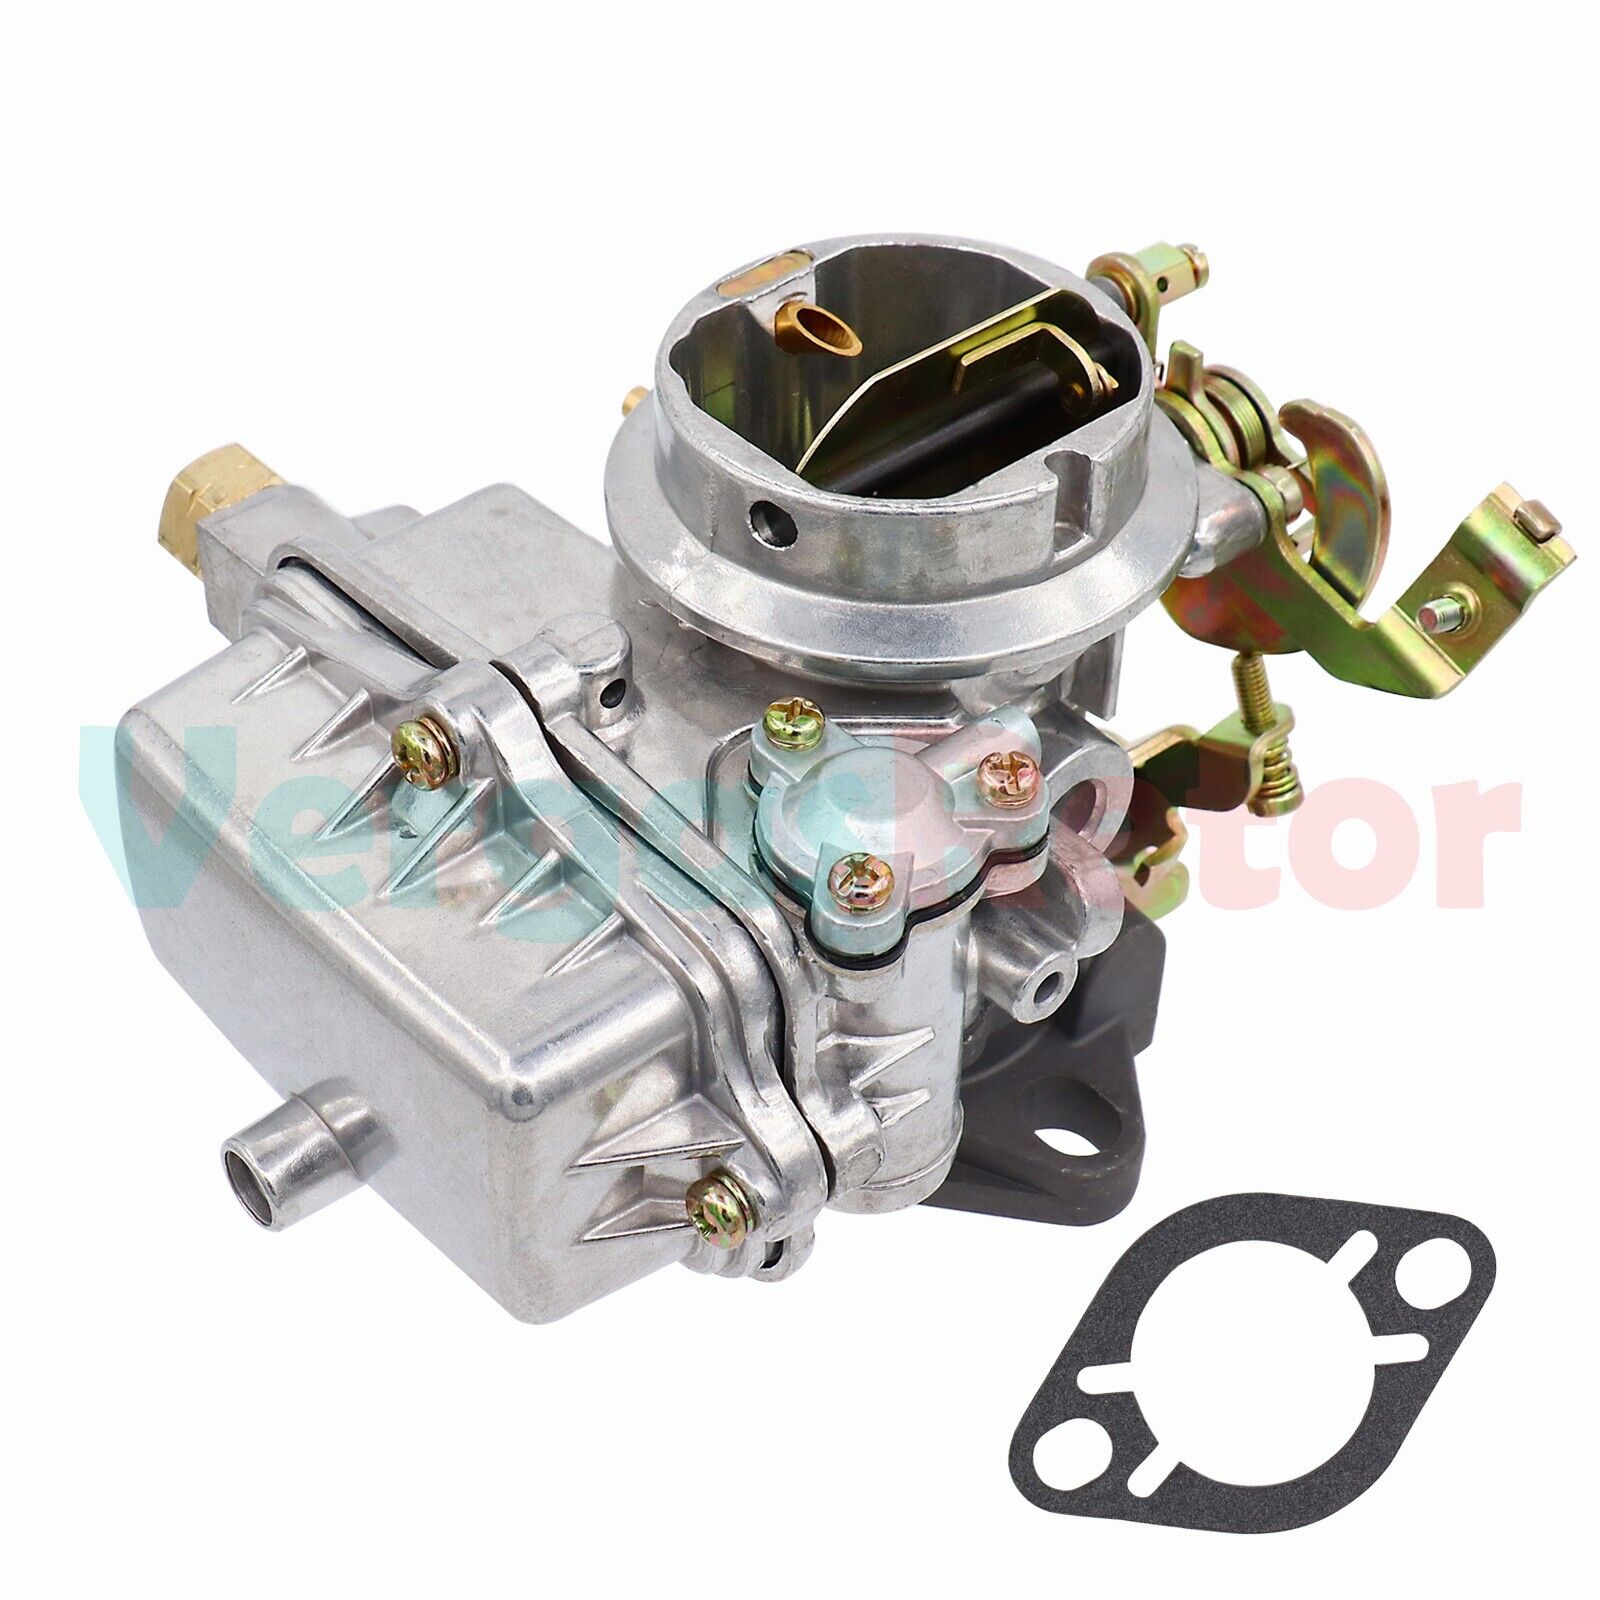 1 Barrel Carburetor replace for HOLLEY 1904 1908 1909 1920 Ford 6 cyl Engine